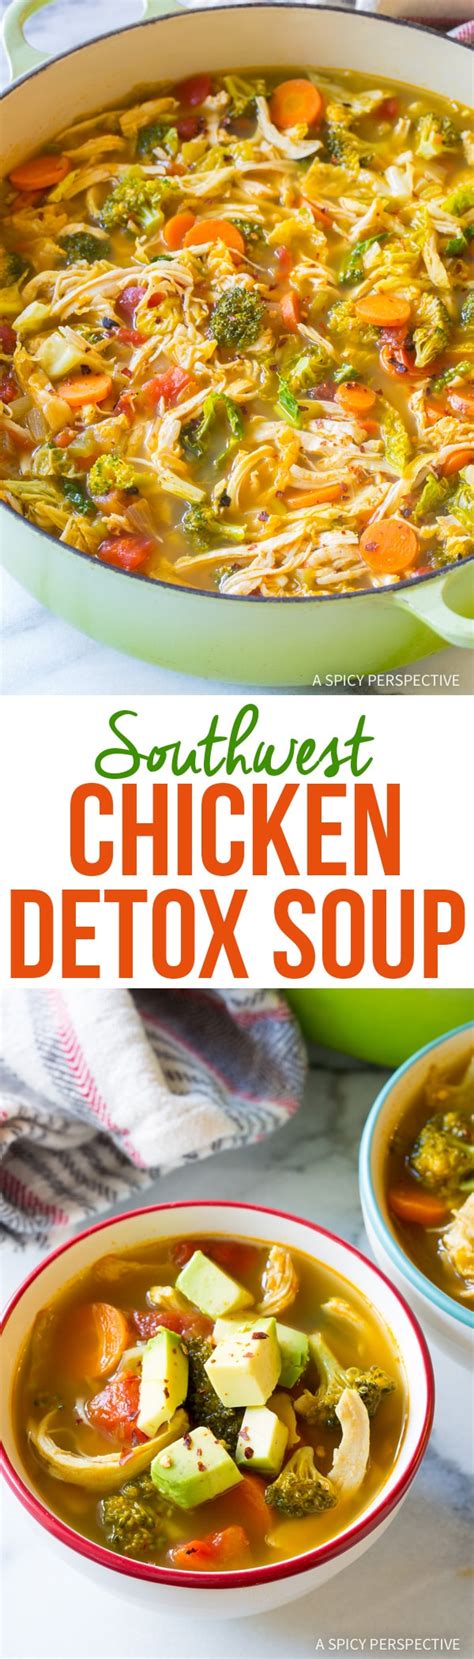 You know the feeling that hits when the craving then this is the recipe for you. Southwest Chicken Detox Soup Recipe - A Spicy Perspective